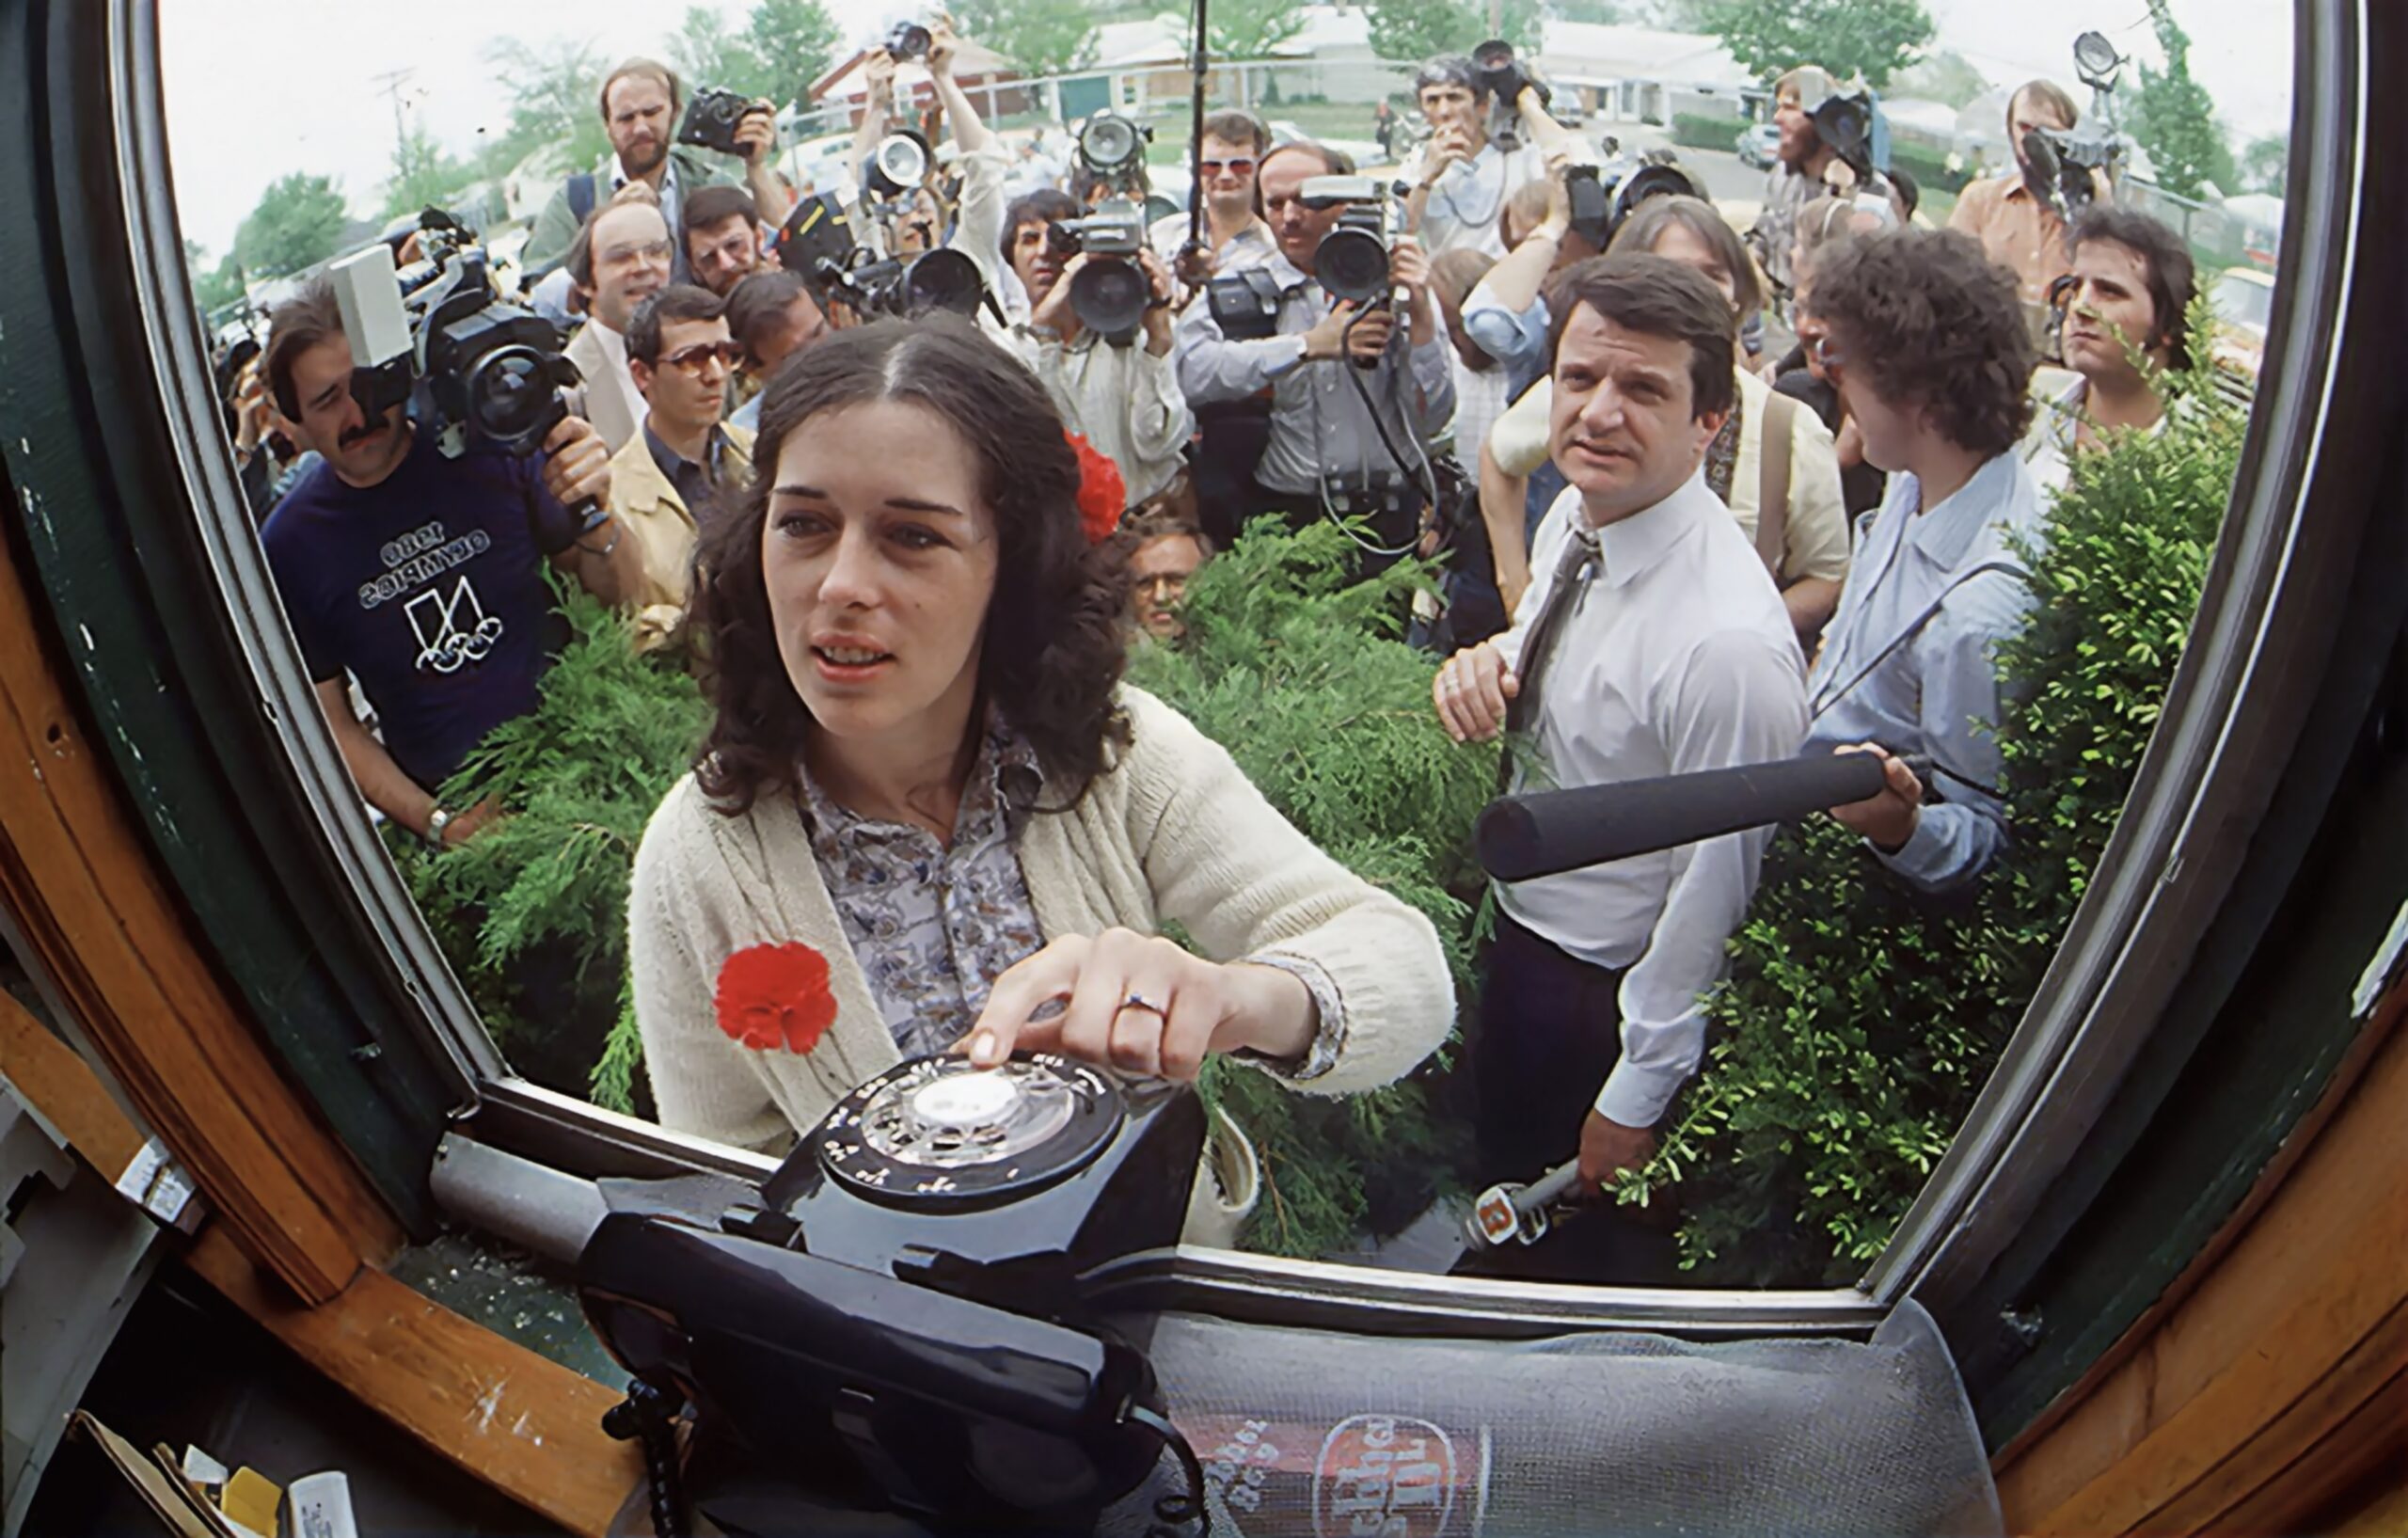 A white woman with brown shoulder length hair wearing a white cardigan stands in front of a window with her hand on a Black rotary phone. Behind her is a bunch of press people and cameras